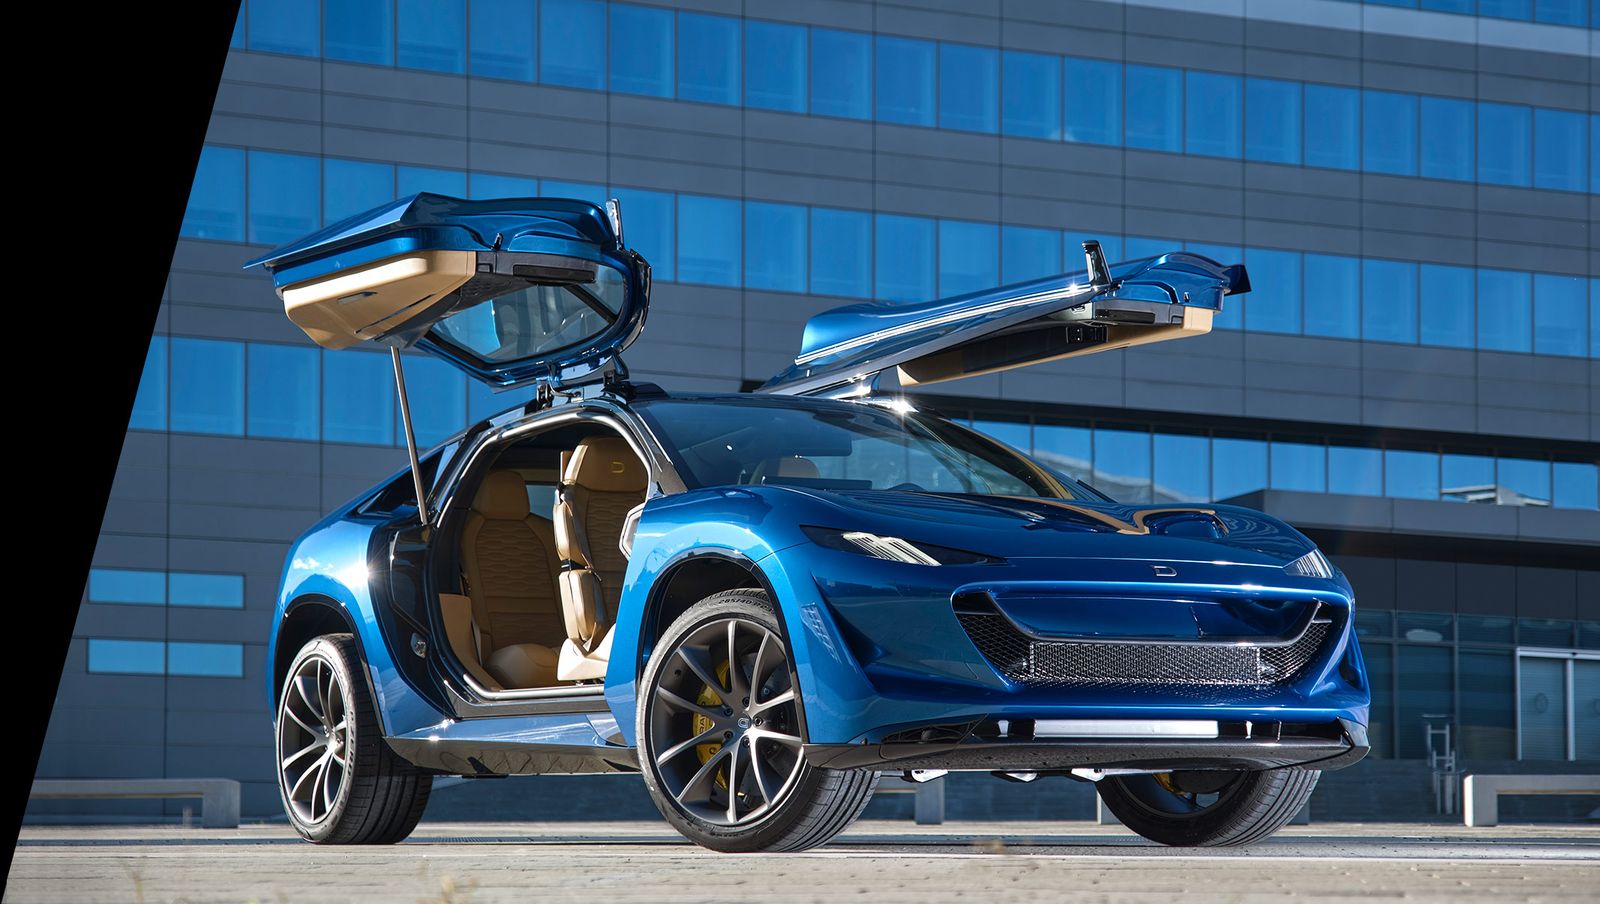 An image of the gullwing Drako Dragon electric car, with doors open.